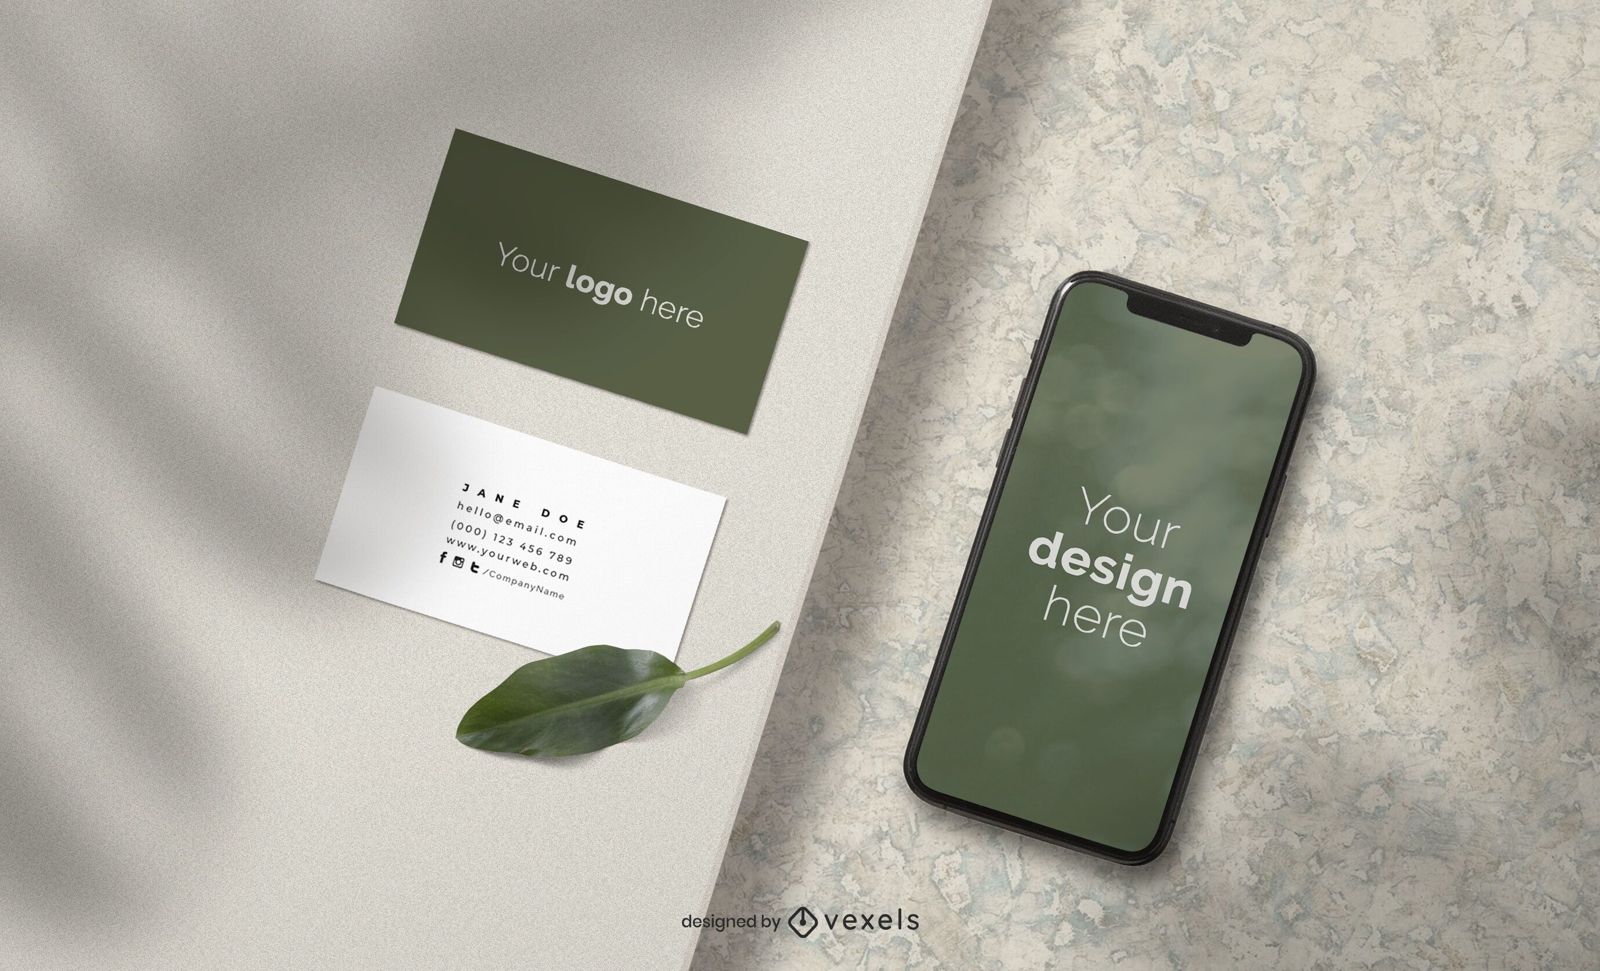 Business cards and iphone mockup composition